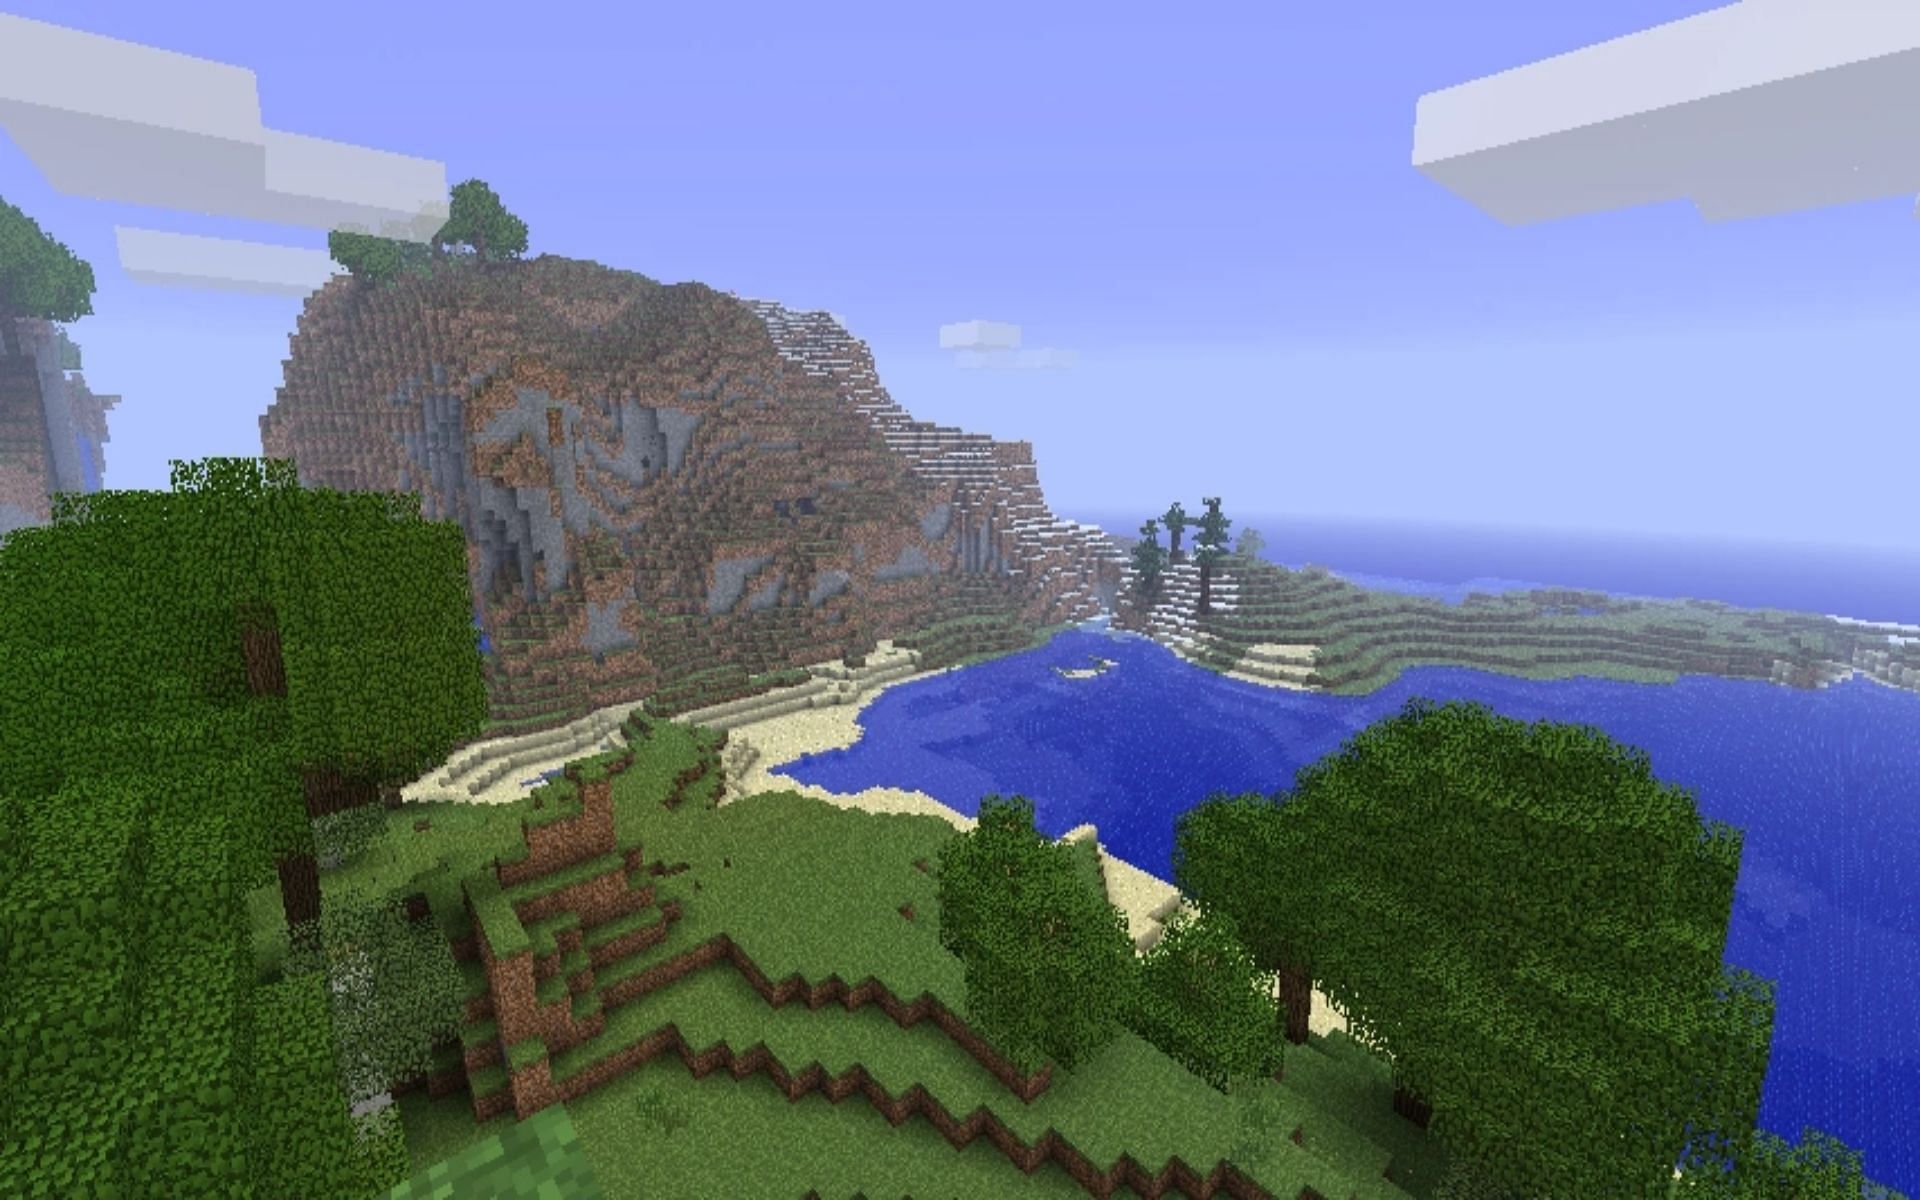 The game was a work in progress for a few years (Image via minecraft.fandom.com)